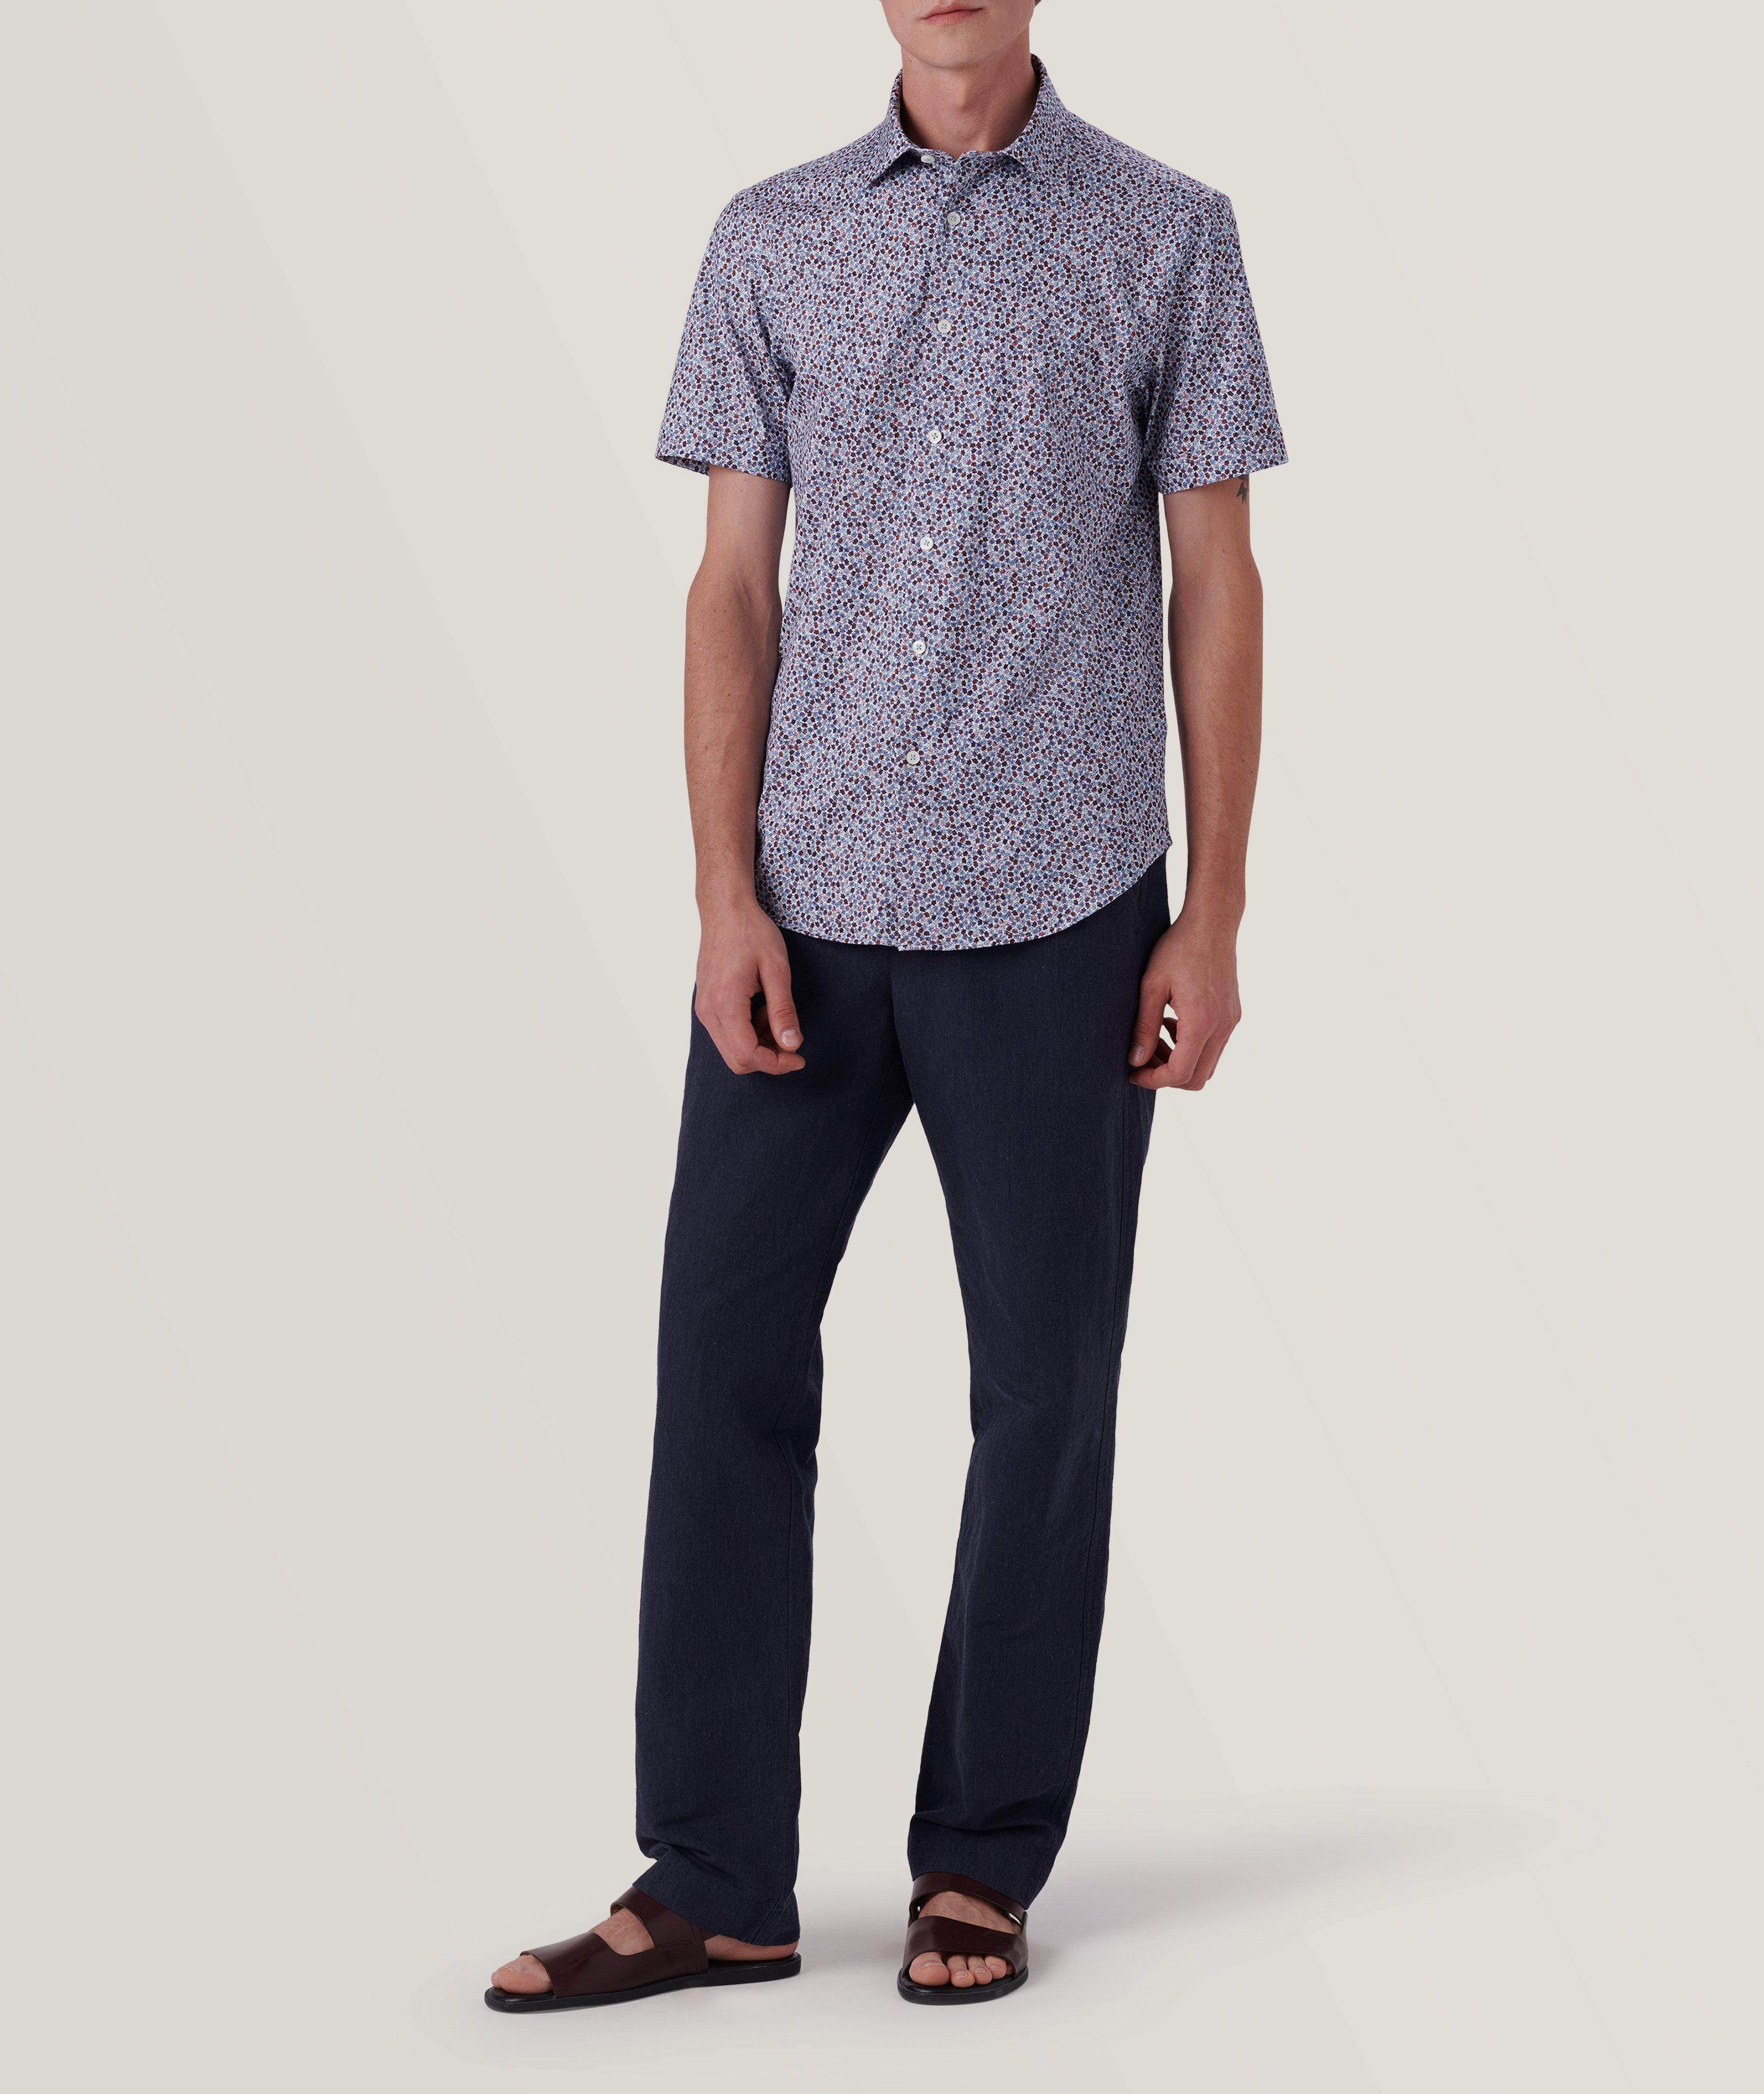 Miles Floral OoohCotton Sport Shirt image 5